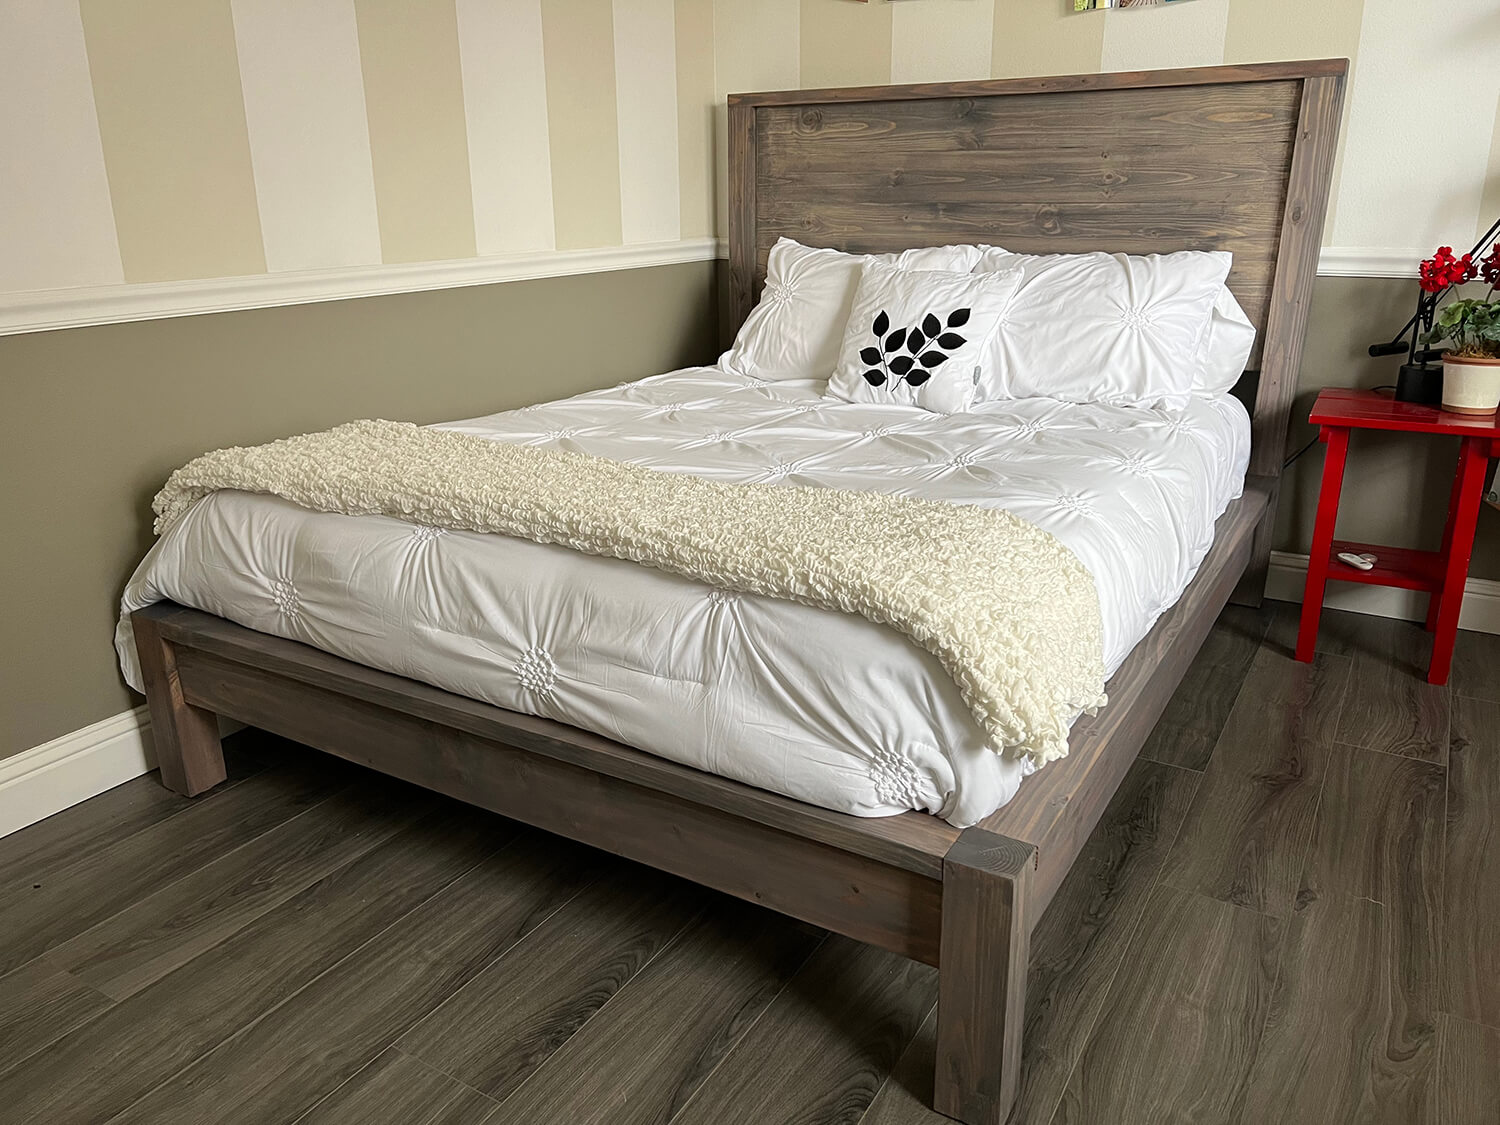 Upgrade your bedroom decor with a low profile queen modern bed by Urban Garden Studio. expertly designed for the perfect height and sleek style to elevate any living space.